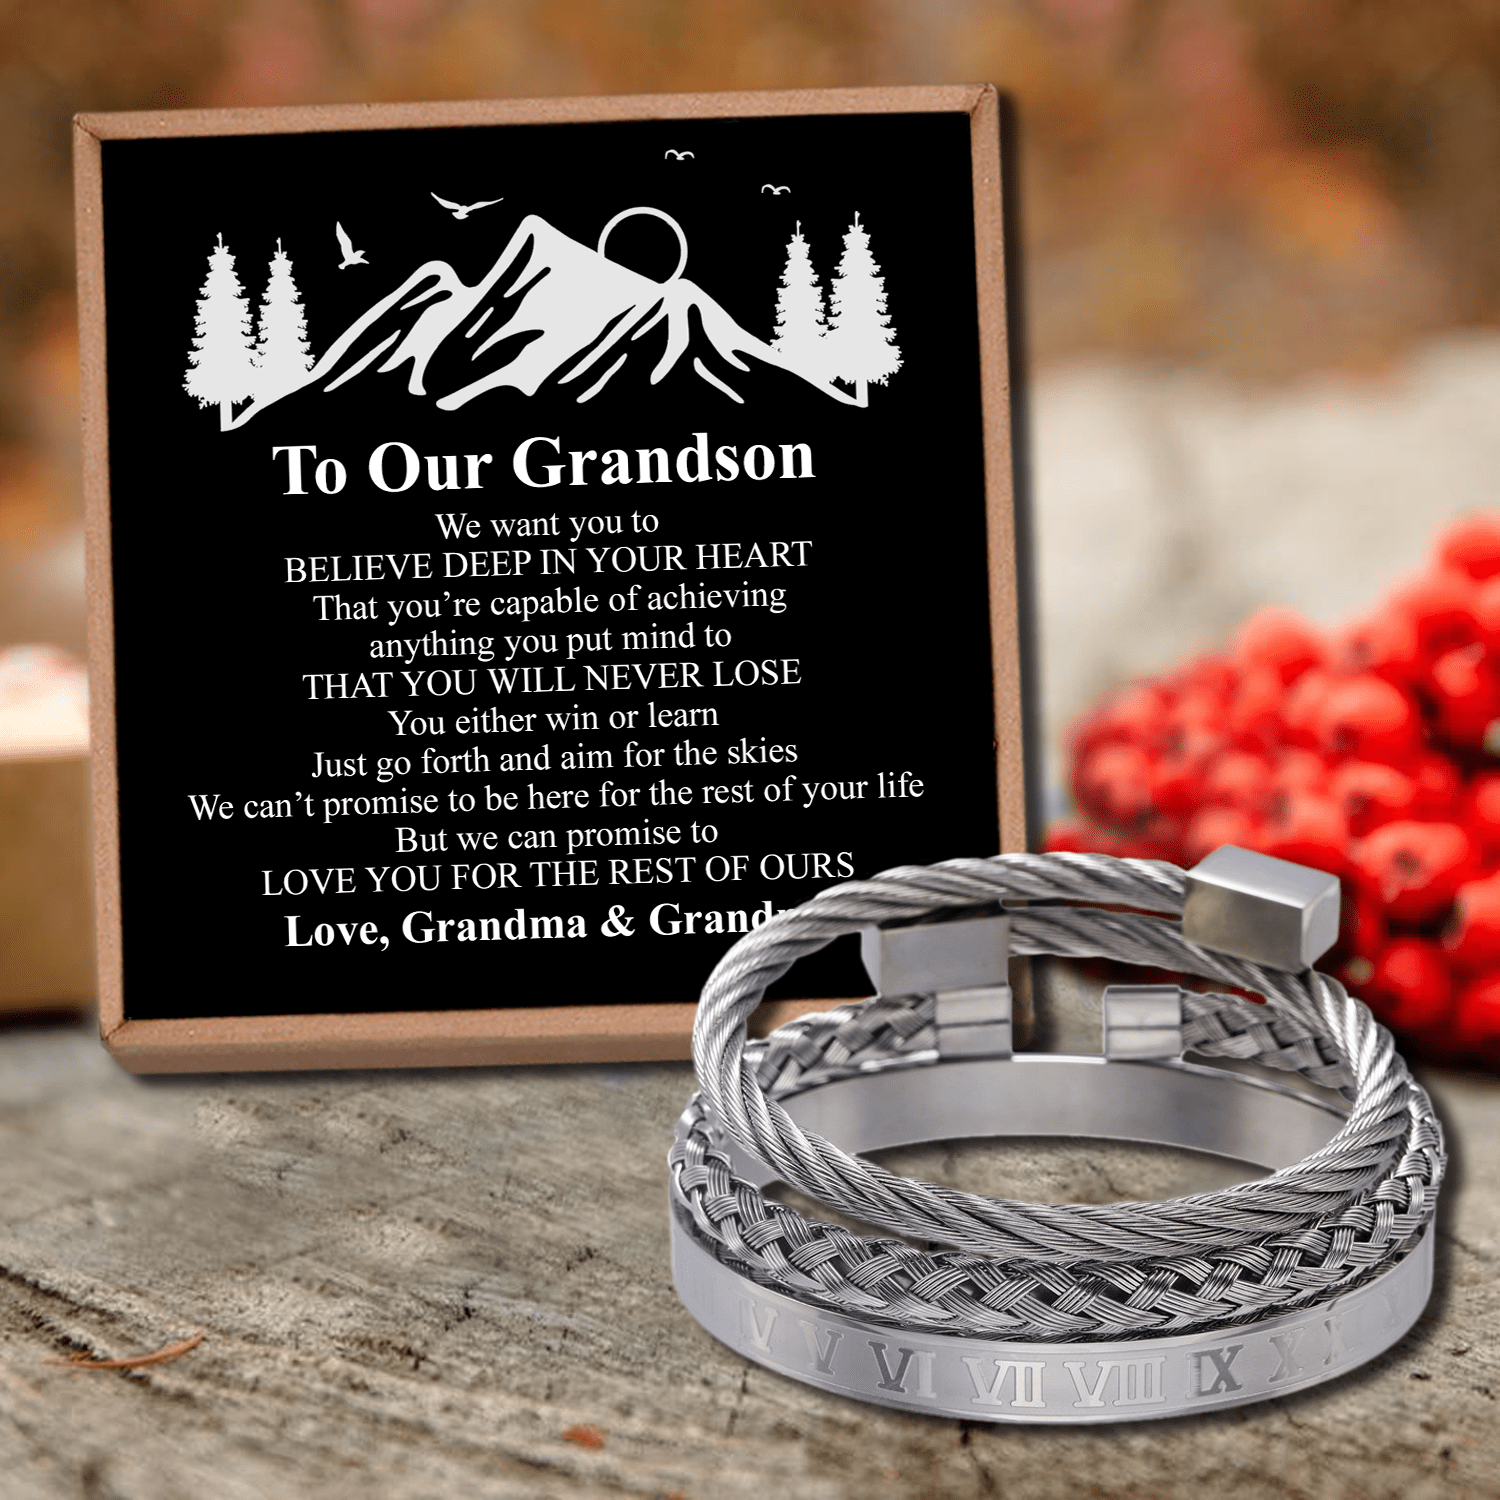 Bracelets To Our Grandson - You Will Never Lose Roman Numeral Bracelet Set Silver GiveMe-Gifts